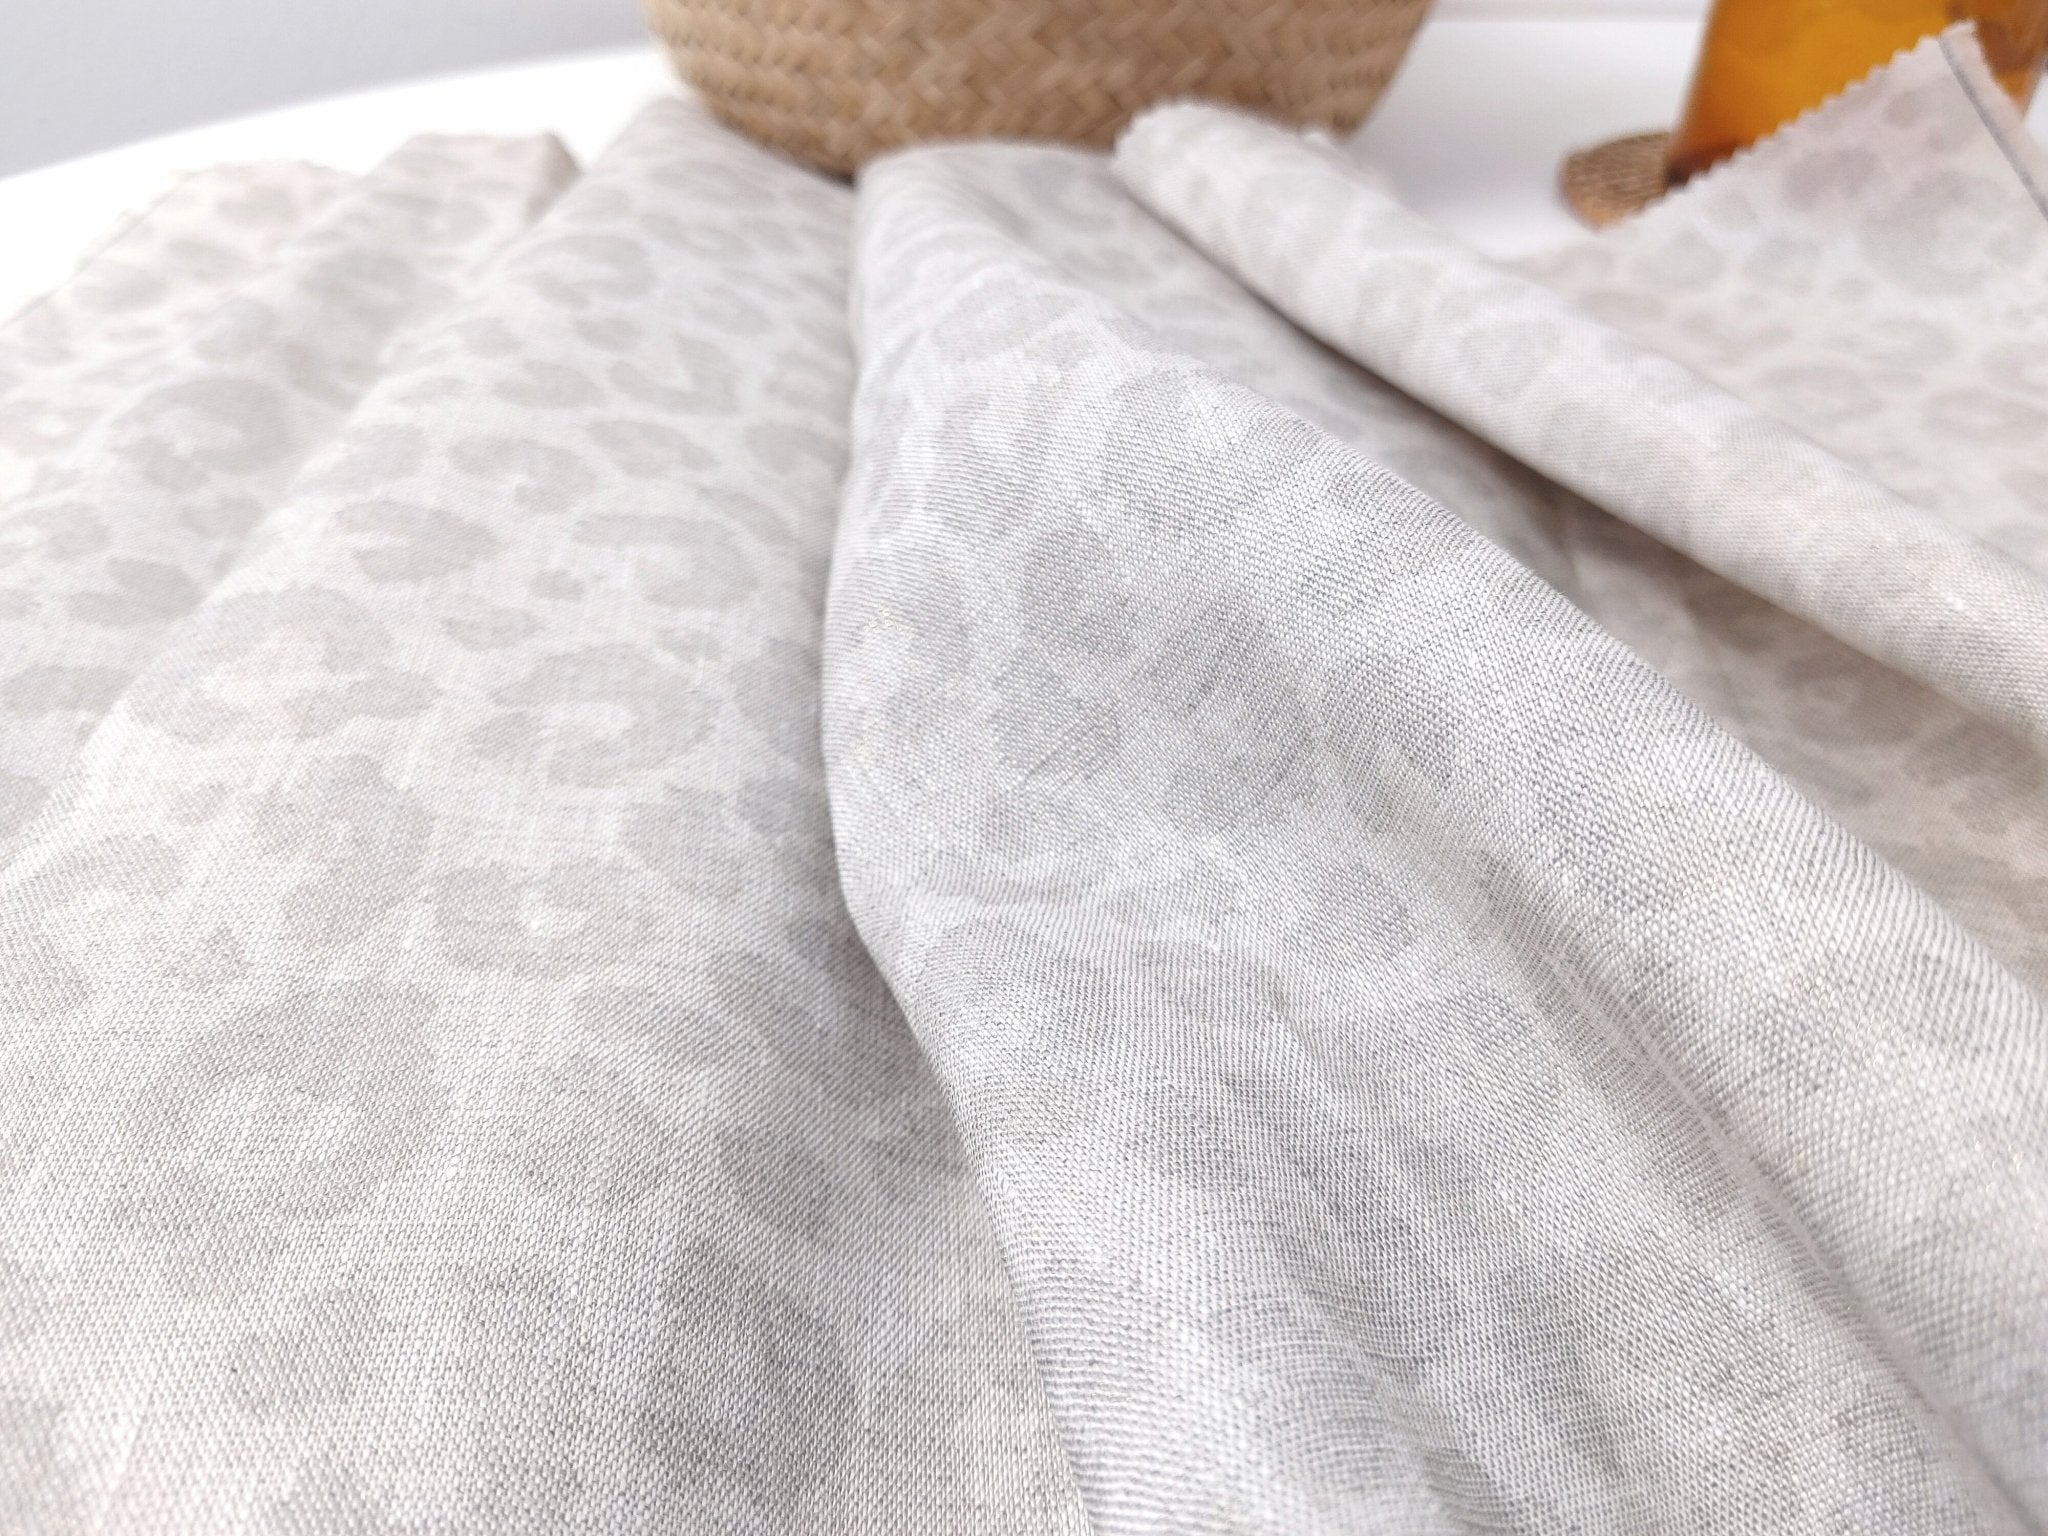 Luxe Safari Elegance: 100% Linen Fabric in Natural Hue with Gold Foil Leopard Print - The Linen Lab - Natural